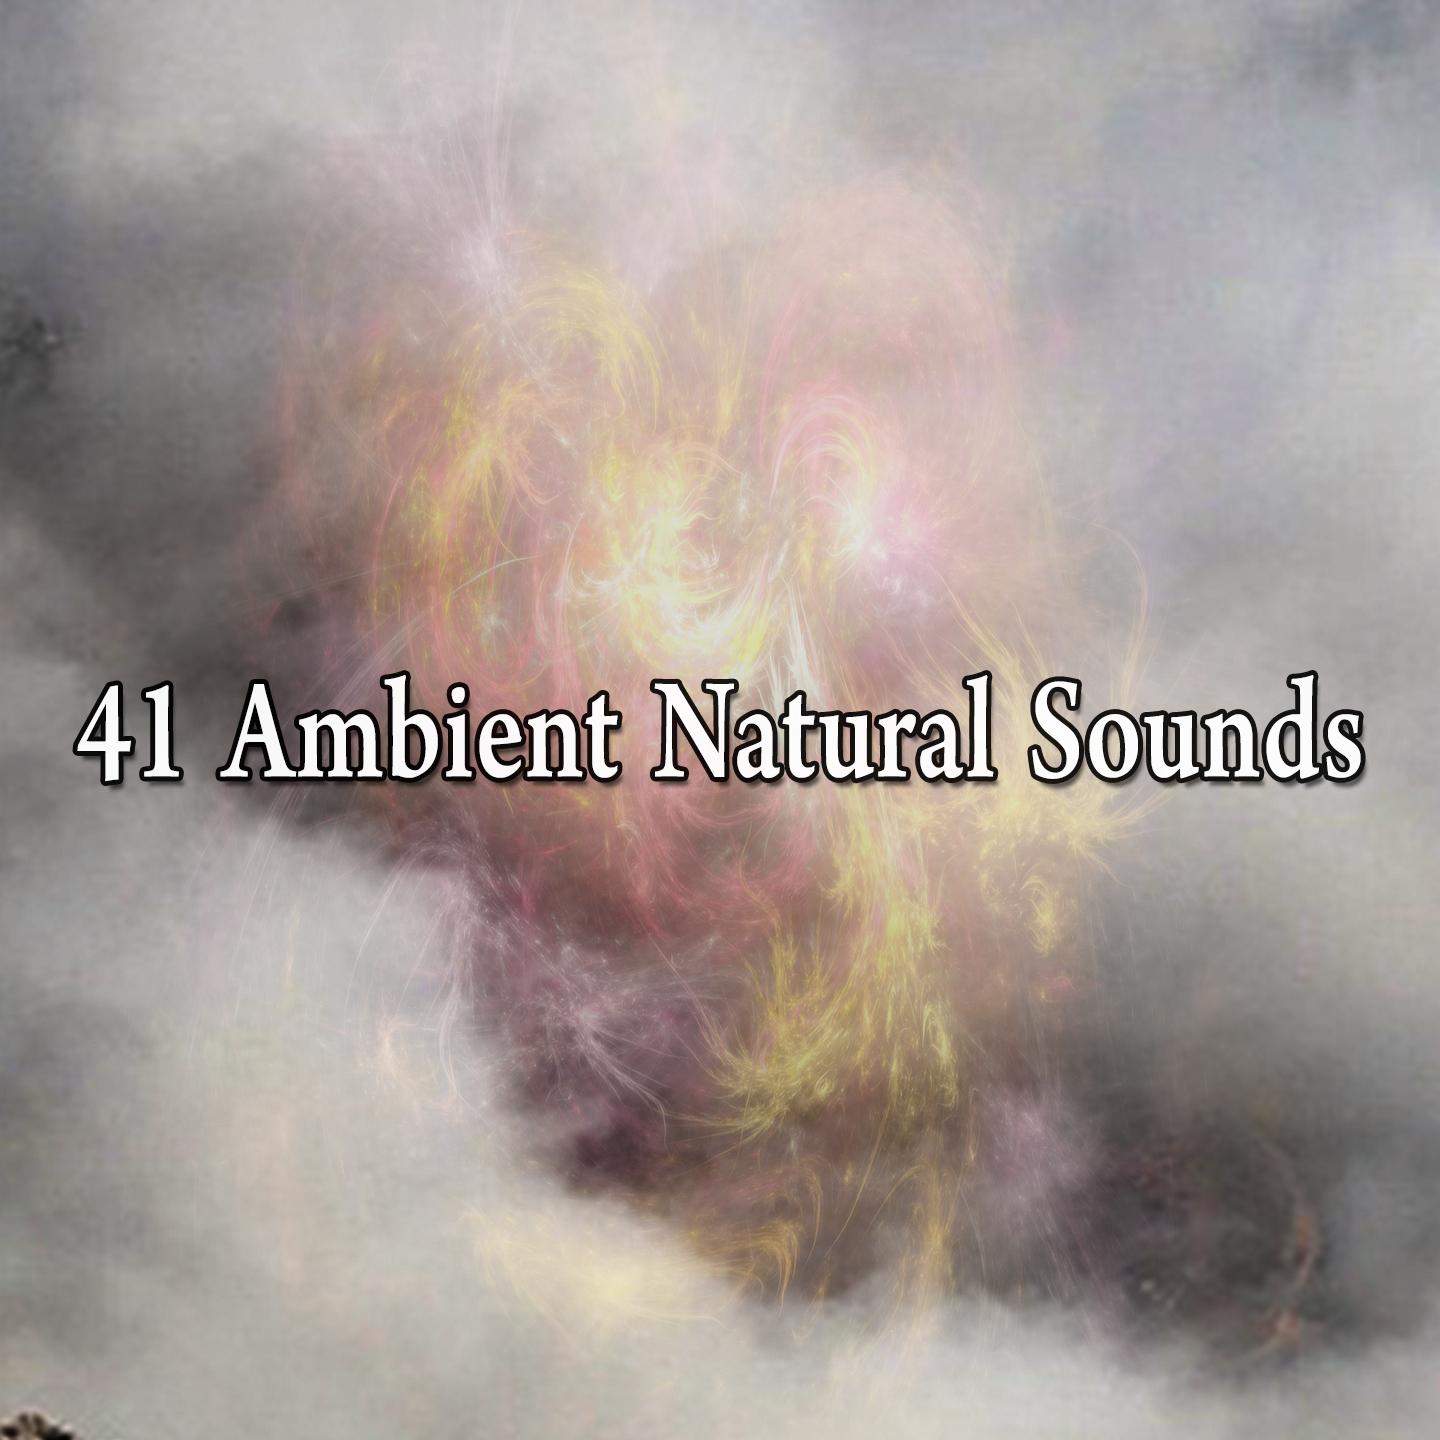 41 Ambient Natural Sounds